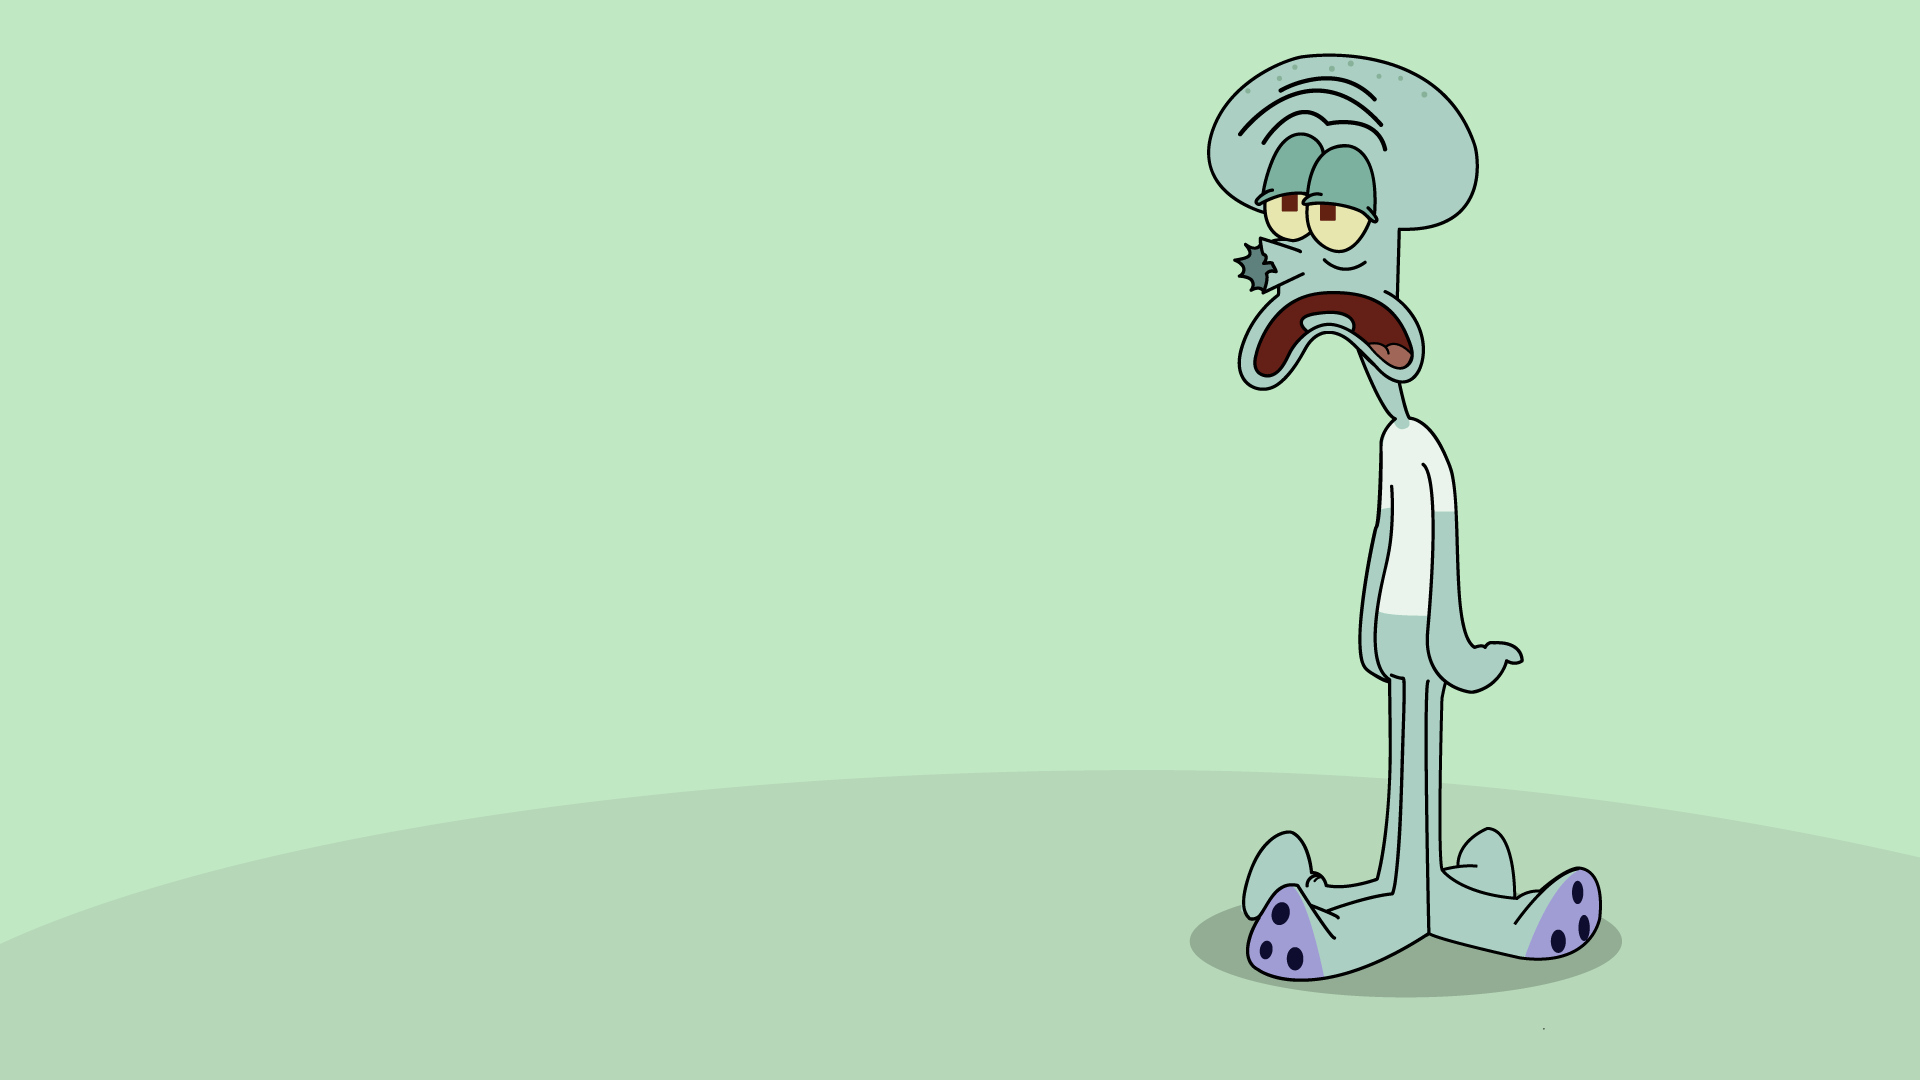 I made this Squidward wallpaper, what do you guys think? [1920x1080]